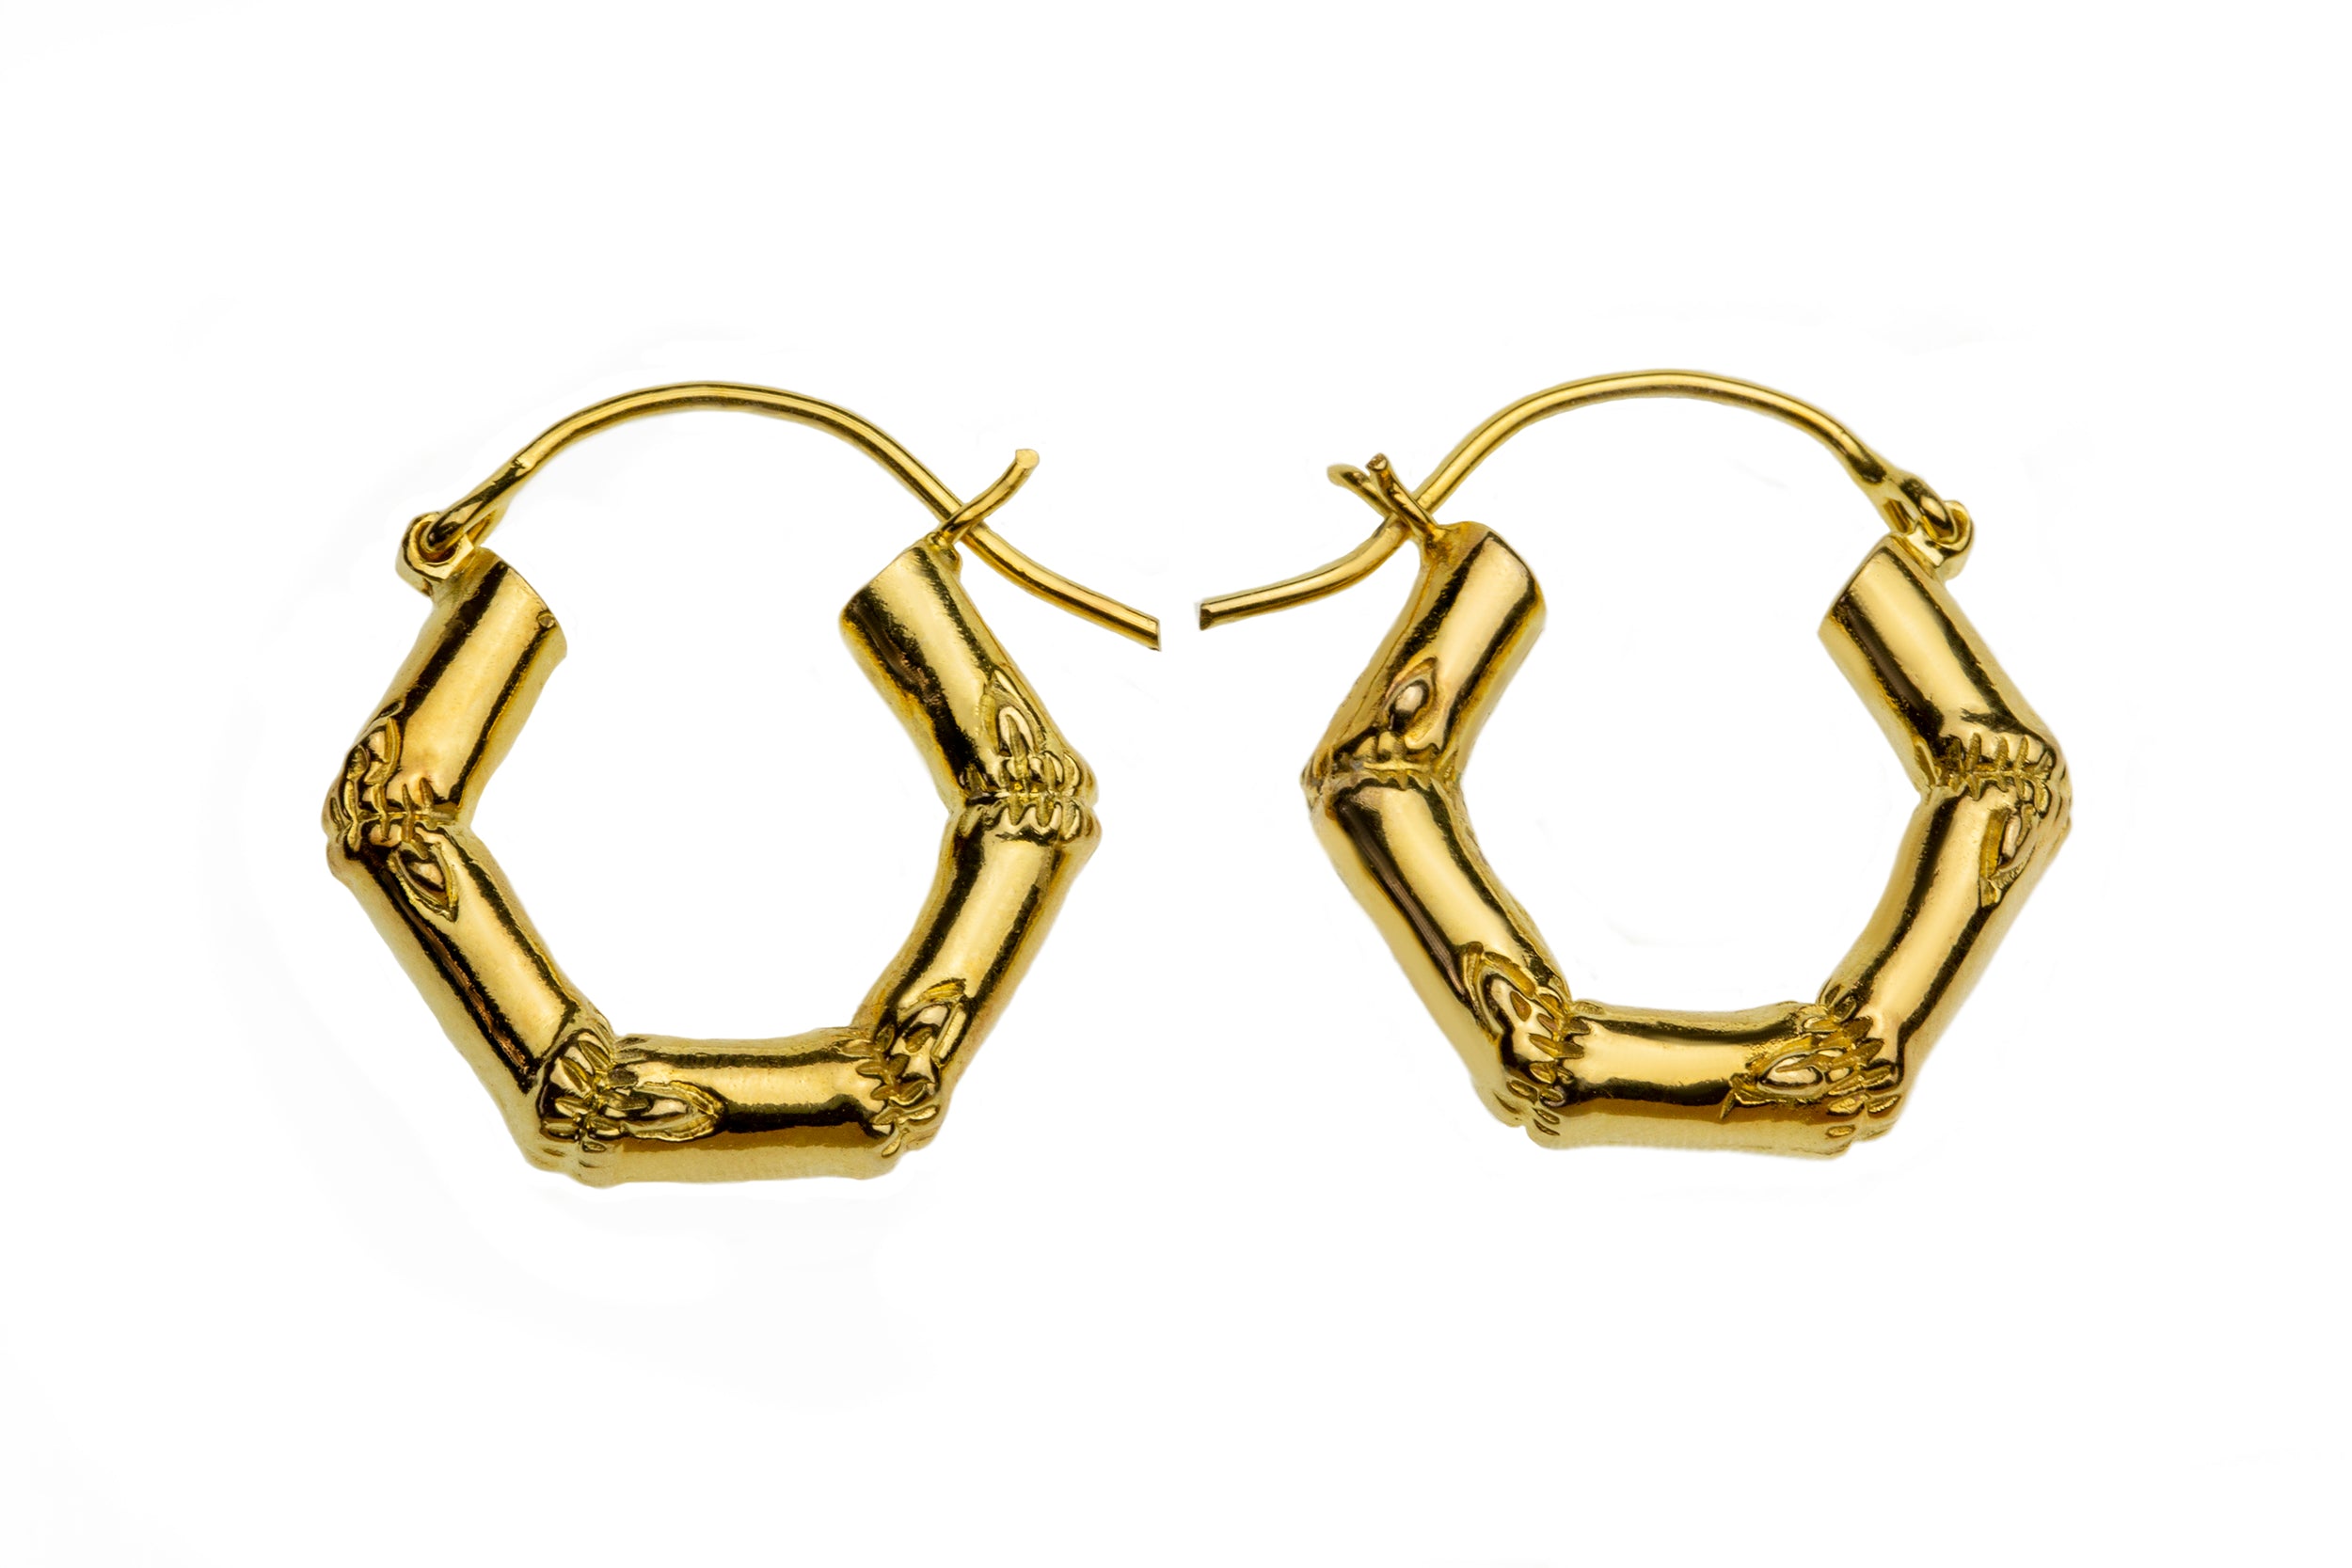 TwoTone Bamboo Name Hoop Earrings in Sterling Silver with 24K Gold Plate  10 Characters  Zales